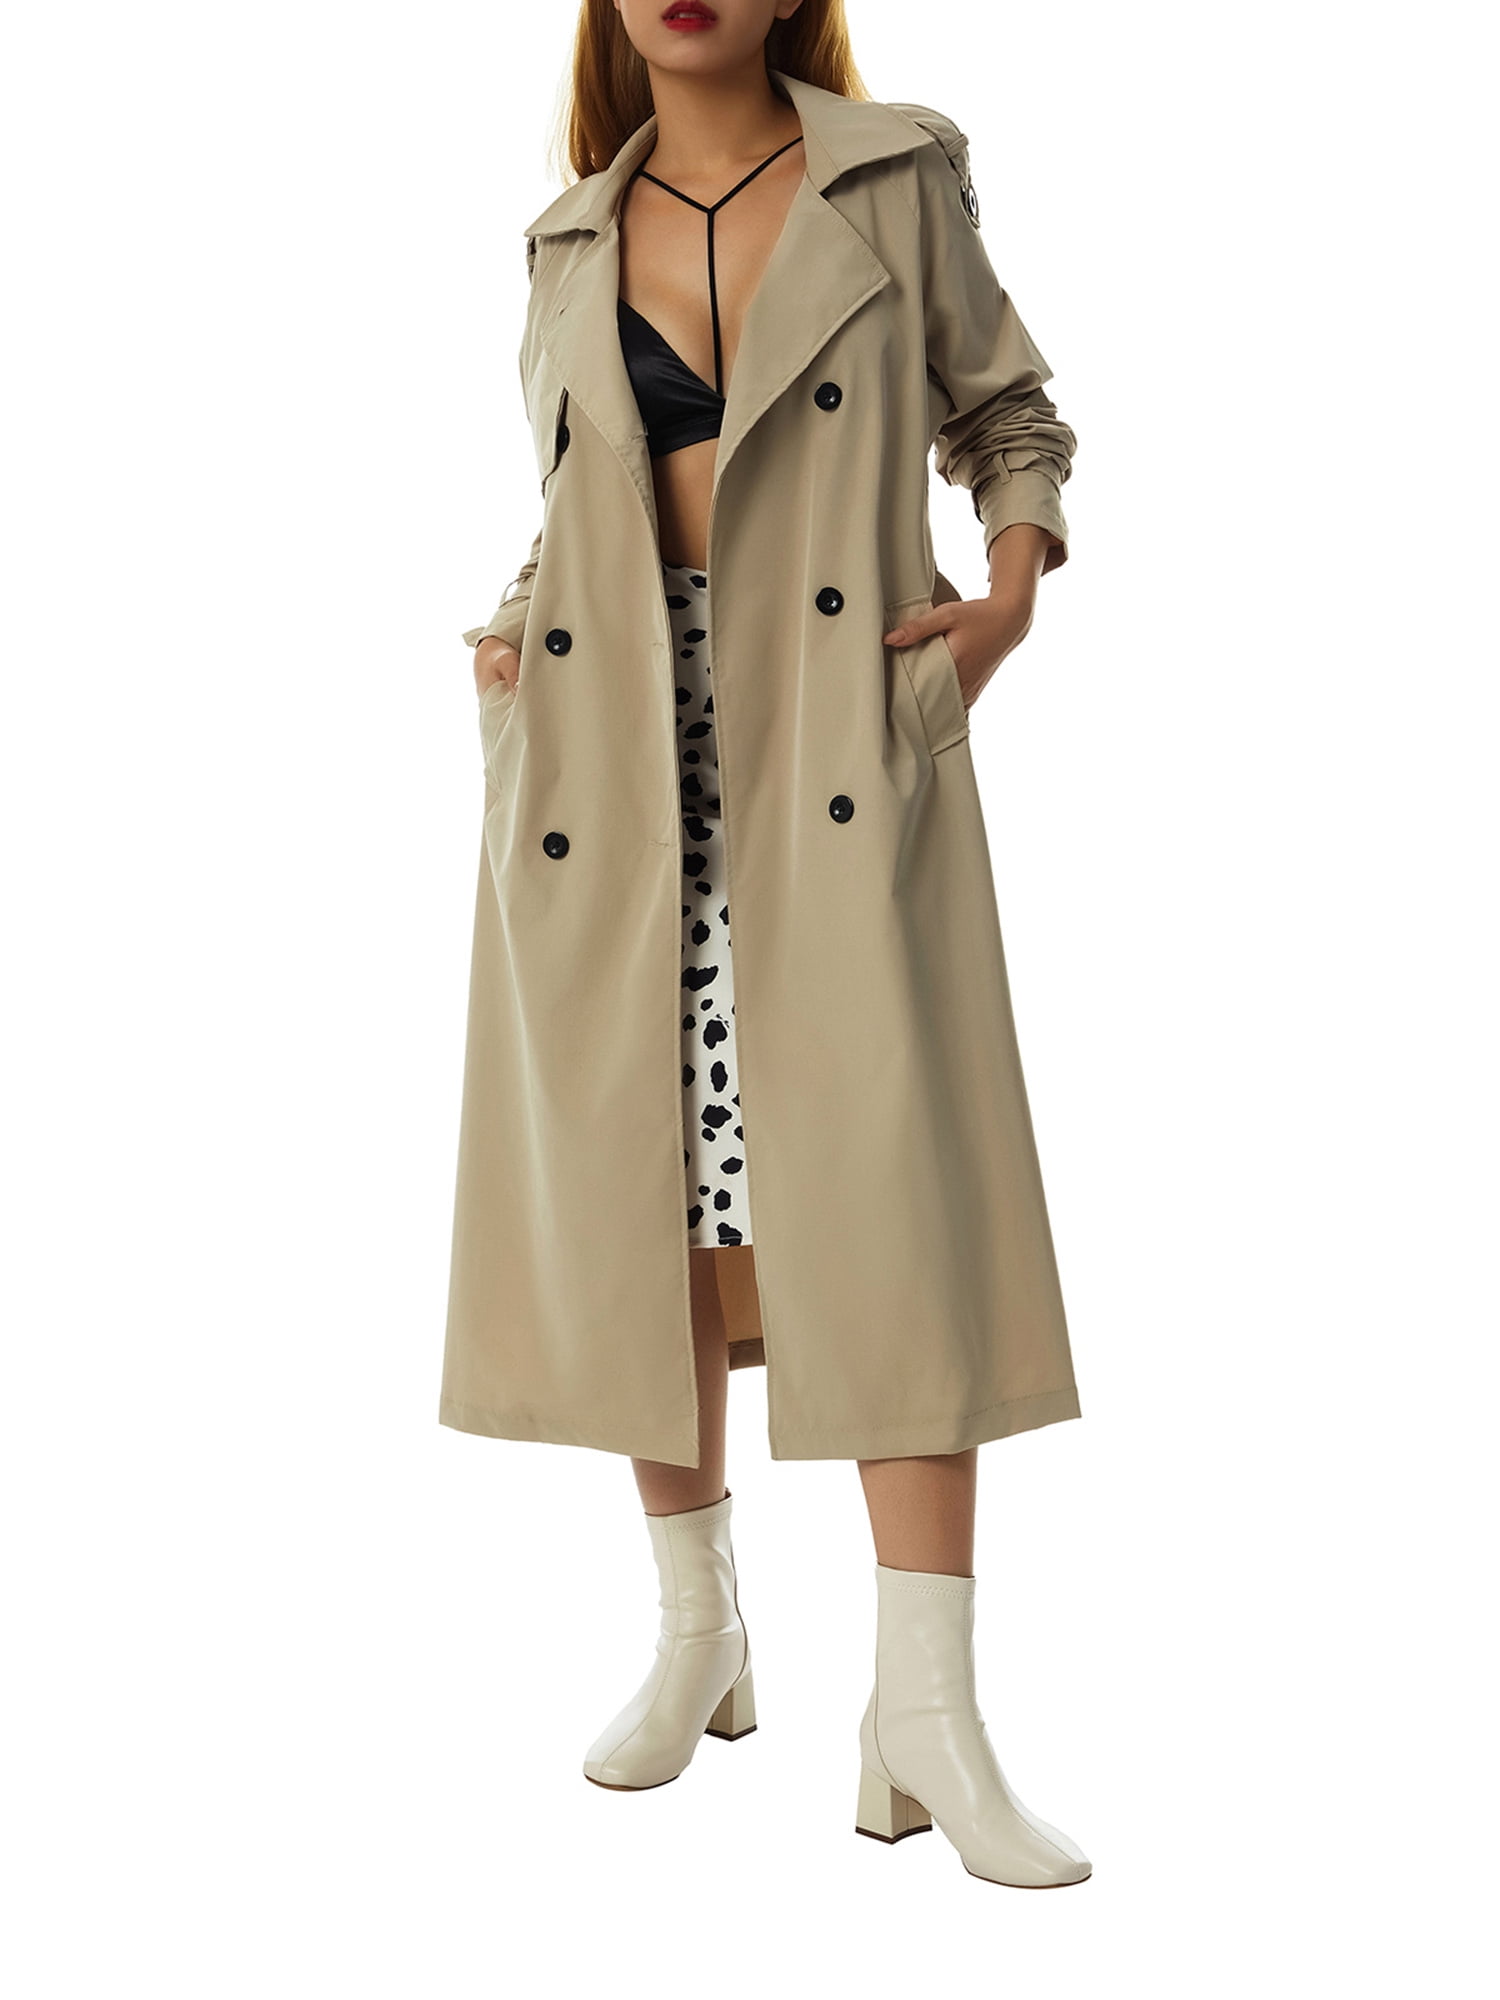 mlpeerw Women's Waterproof Double-Breasted Trench Coat Classic Lapel ...